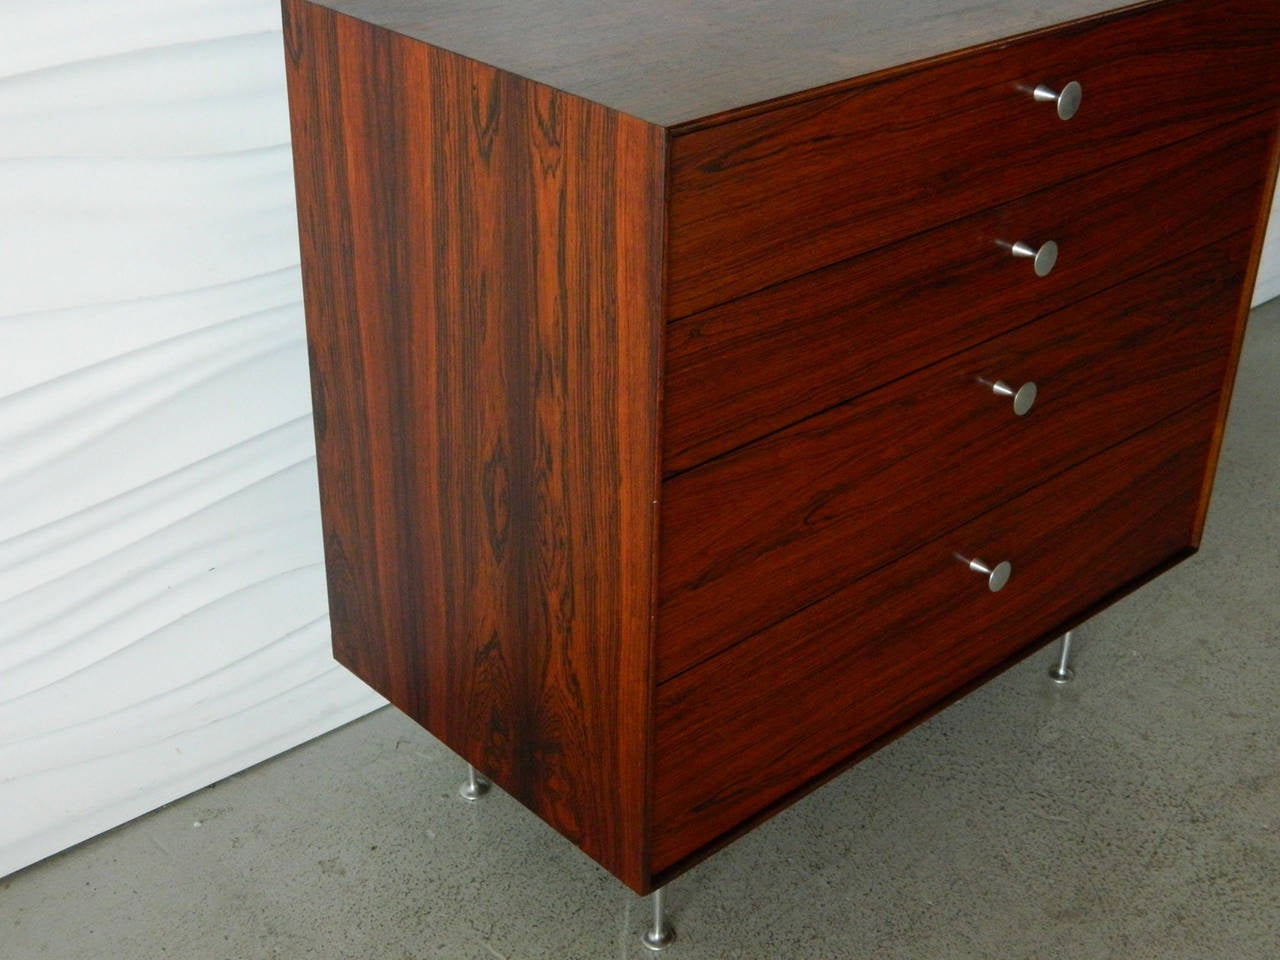 Gorgeous four-drawer rosewood chest of drawers from American designer George Nelson's Thin Edge series for Herman Miller. The top drawer has a built-in vanity mirror. 

Two additional rosewood chests are available to create a beautiful trio of